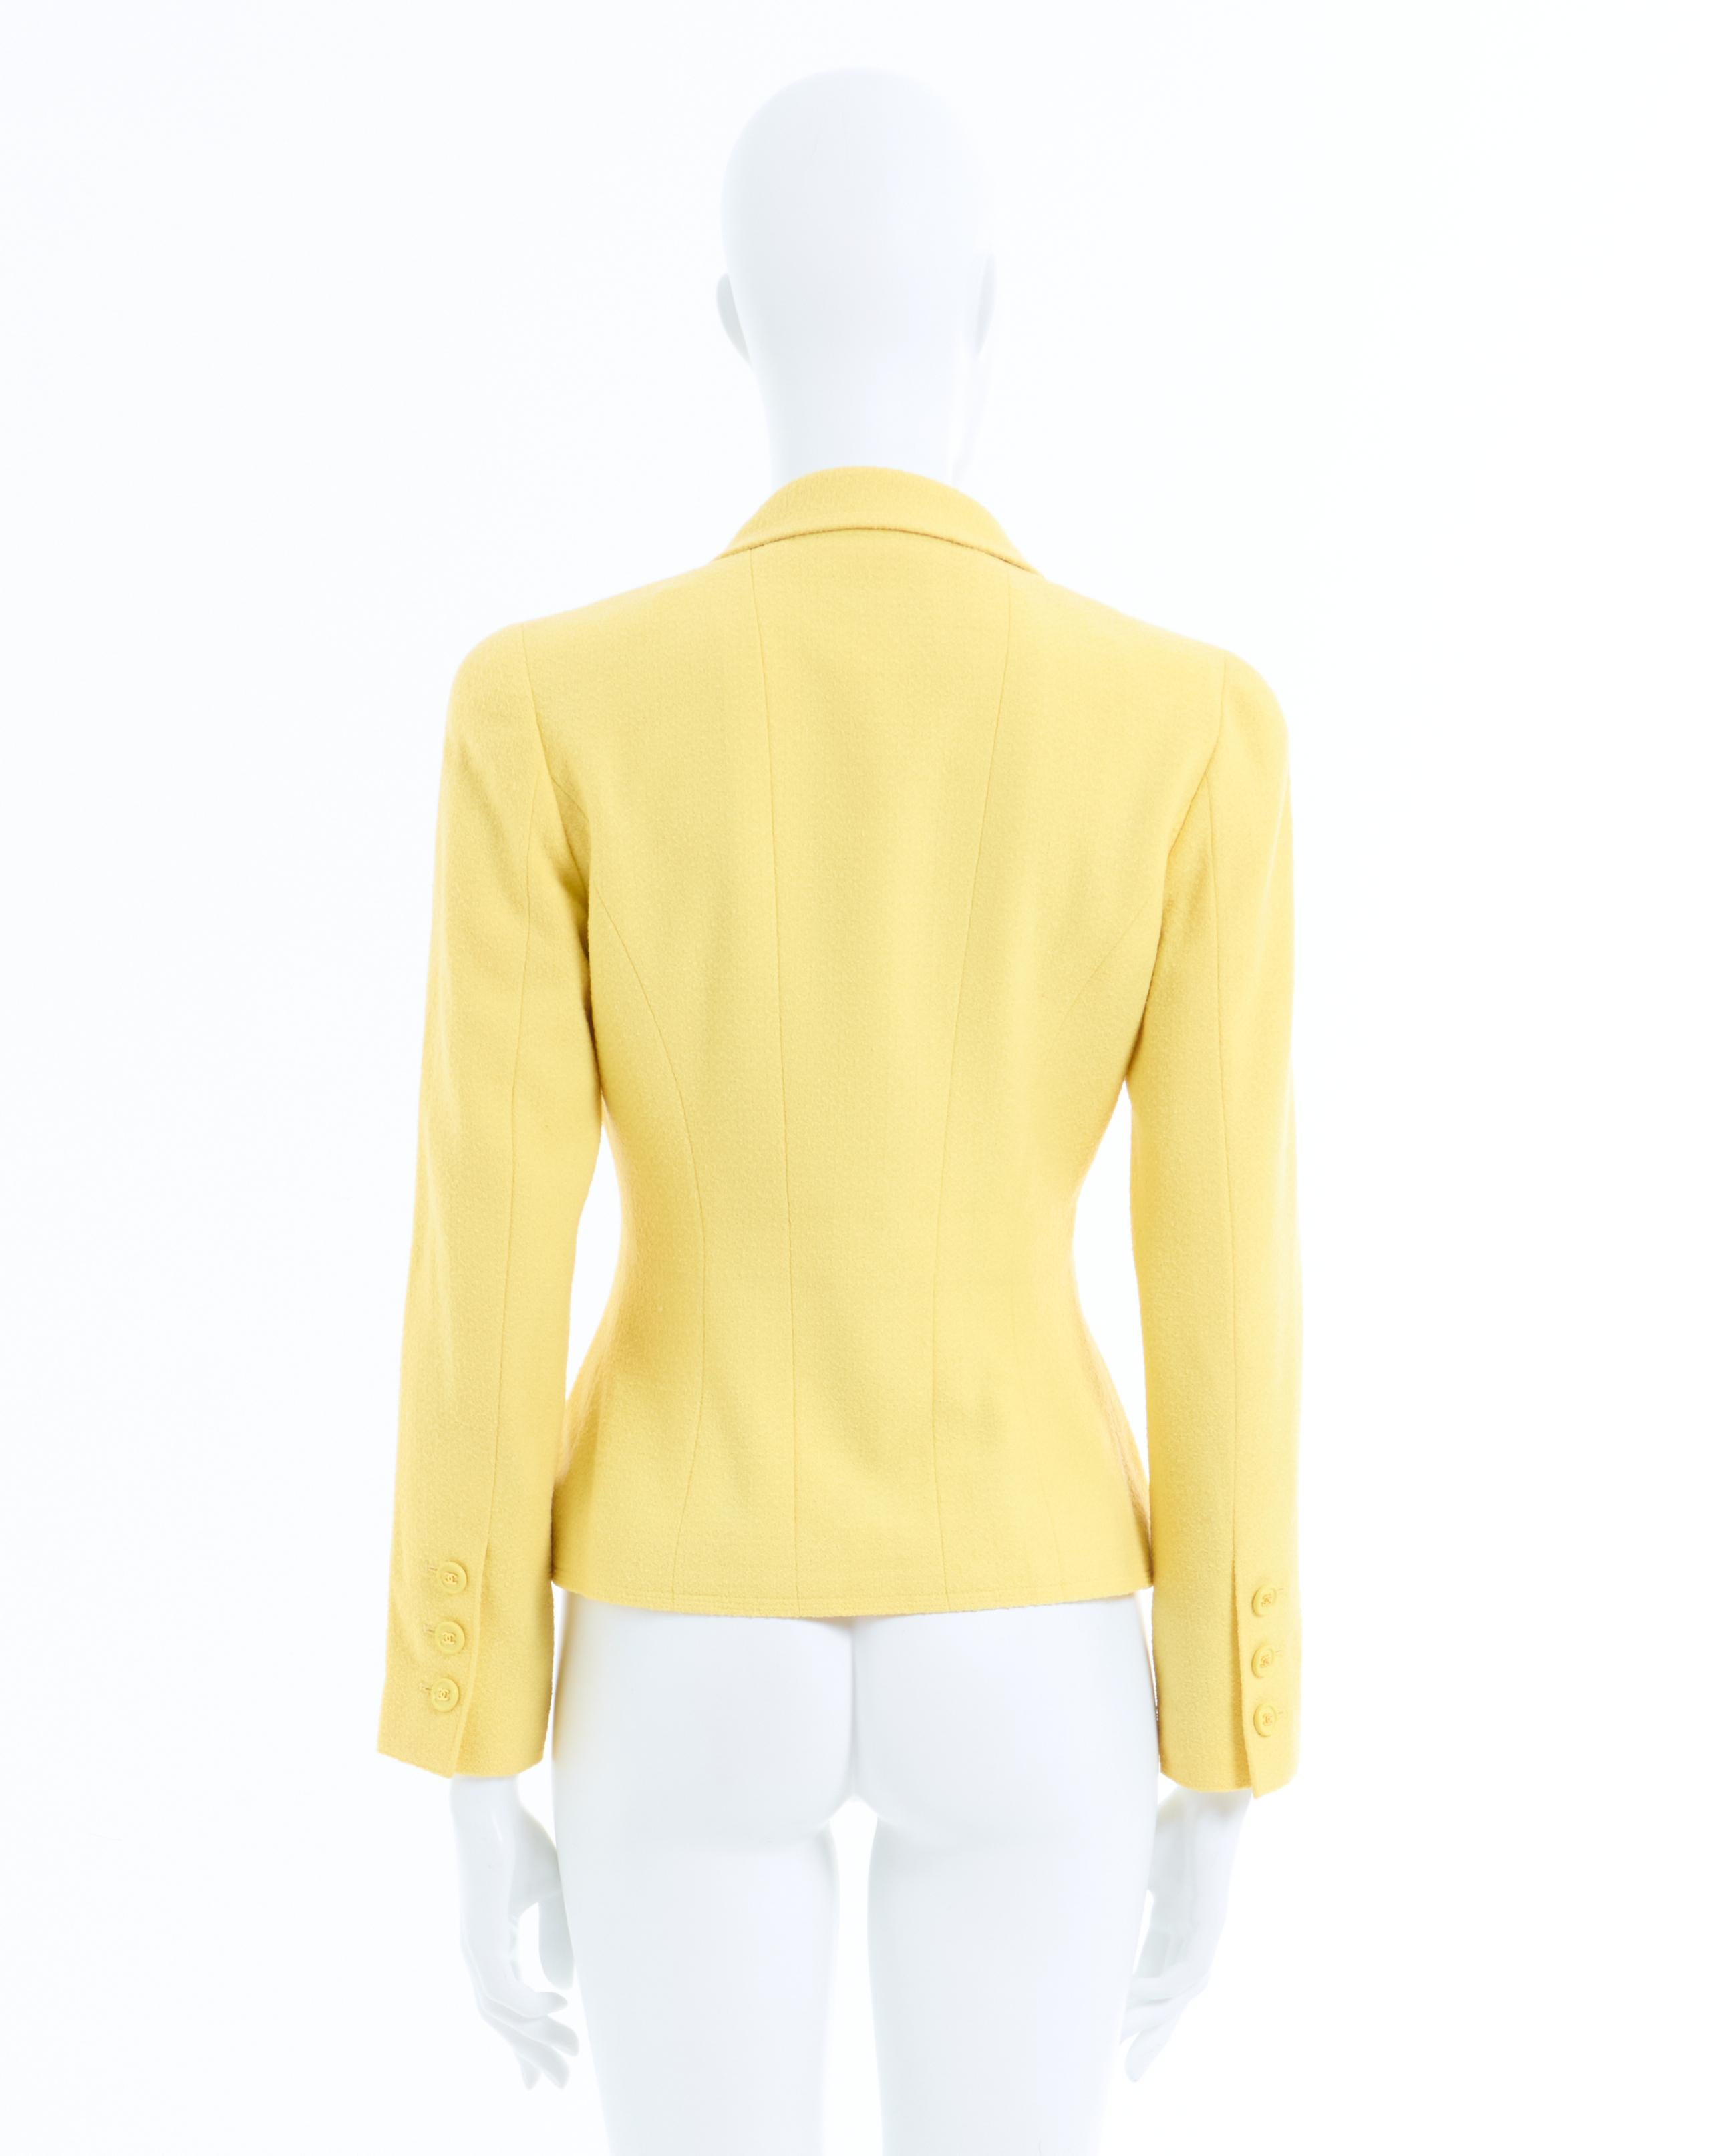 Chanel by Karl Lagerfeld S/S 1997 Yellow CC logo fitted jacket  In Excellent Condition For Sale In Milano, IT